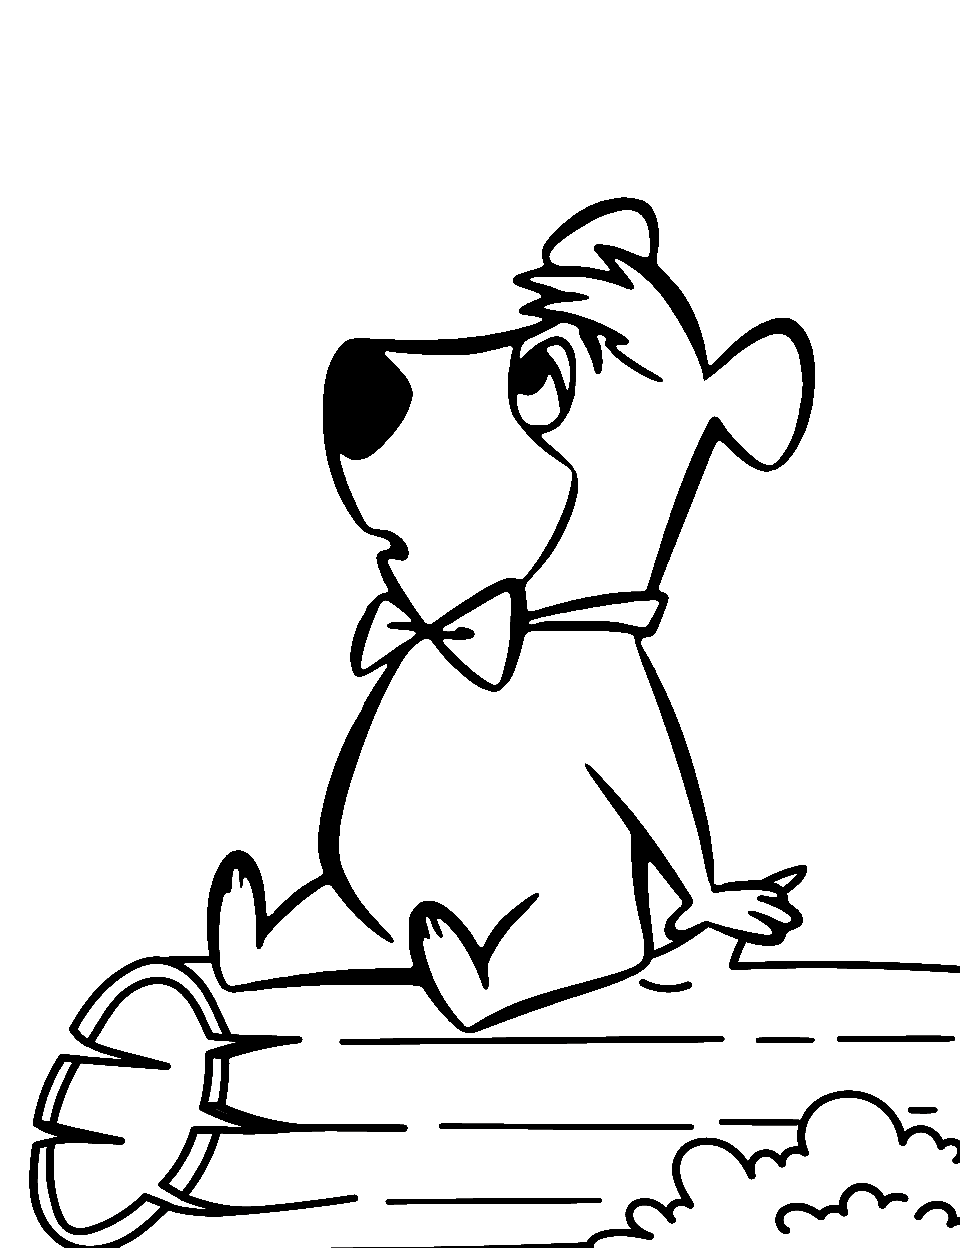 Boo-Boo's Thoughtful Moment Coloring Page - Boo-Boo Bear sitting on a log, deep in thought.